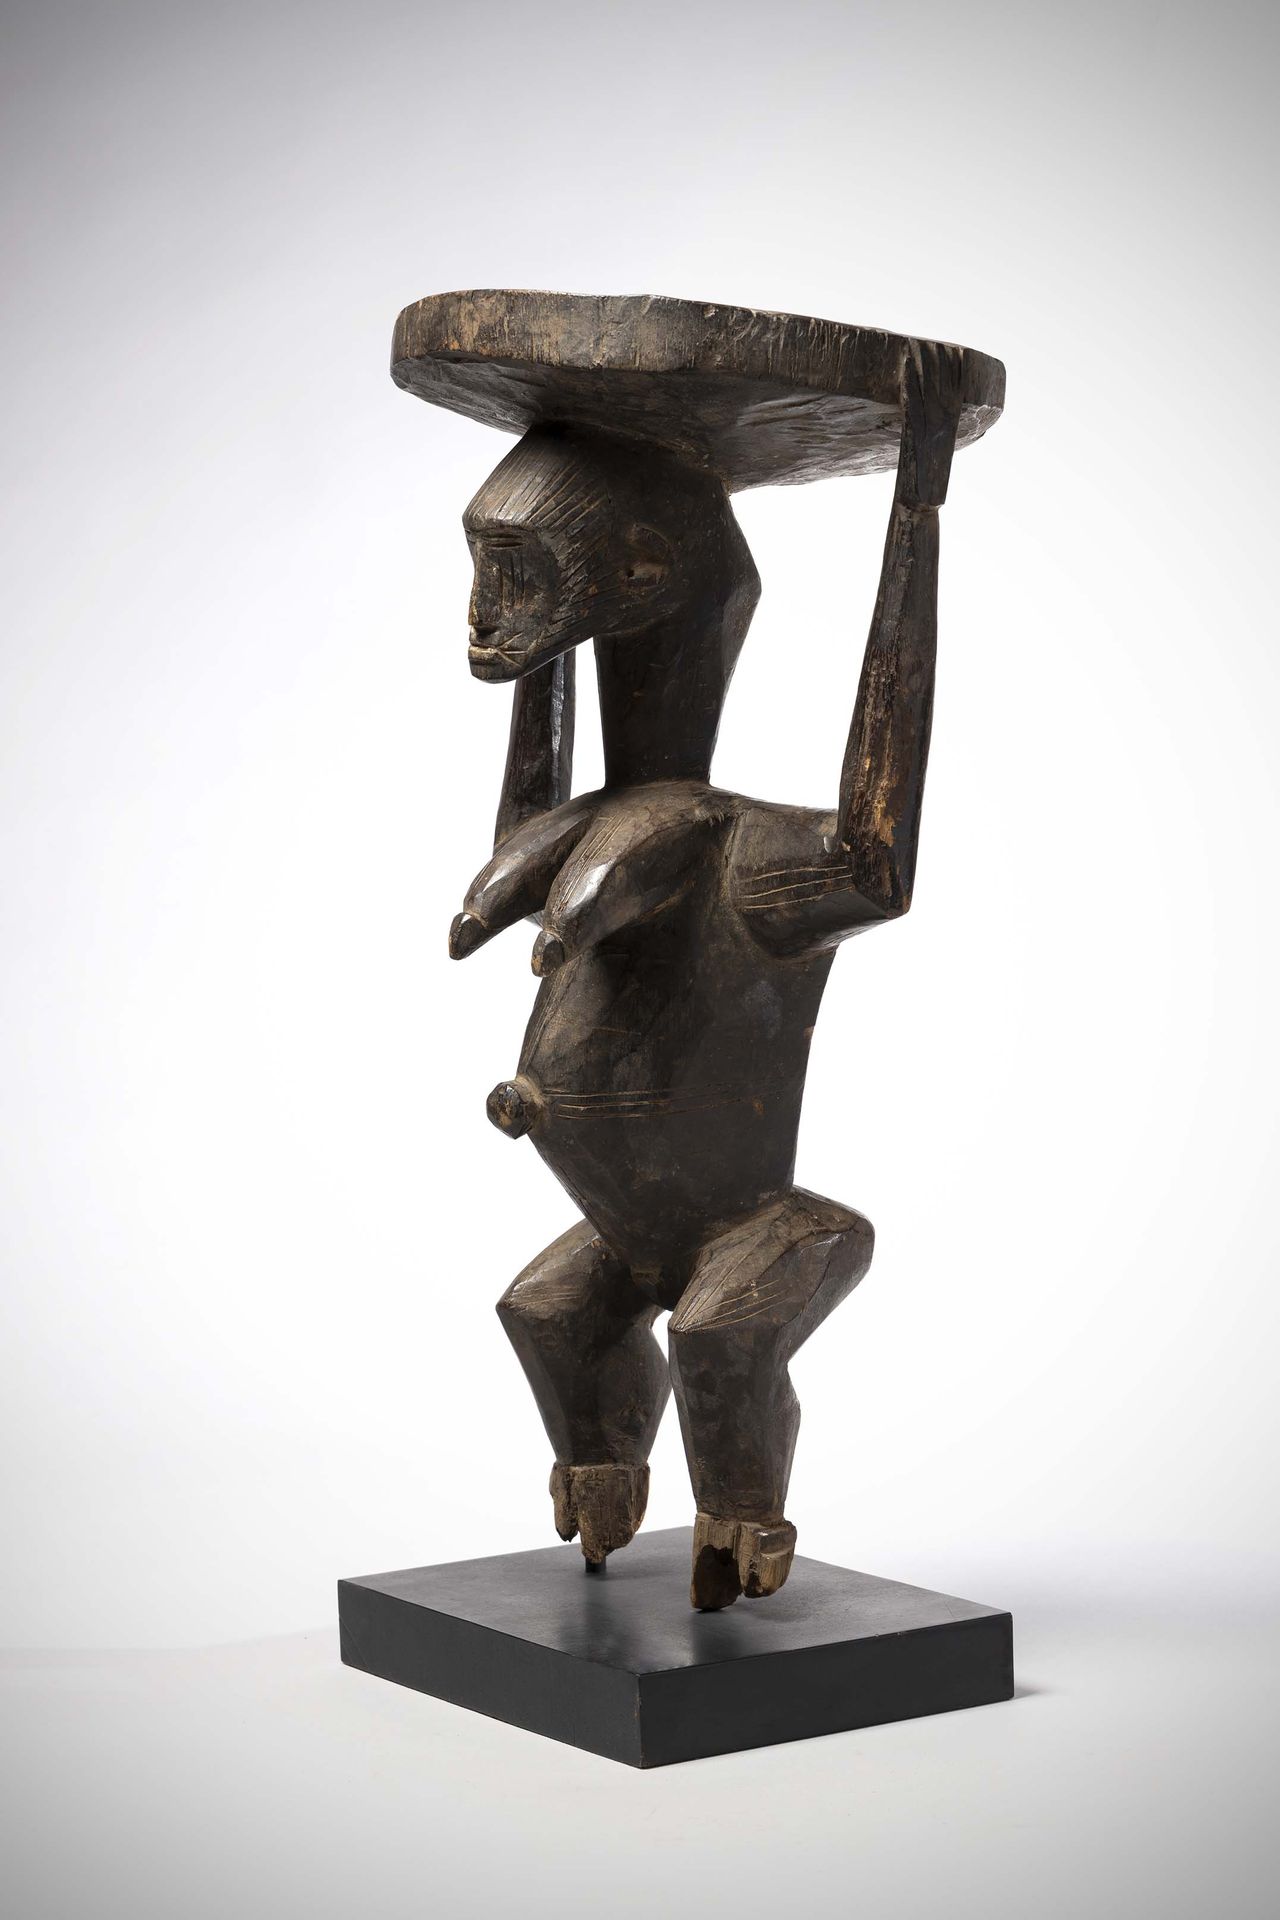 Null Afo

( Nigeria ) Caryatid altar seat representing a woman with angular feat&hellip;